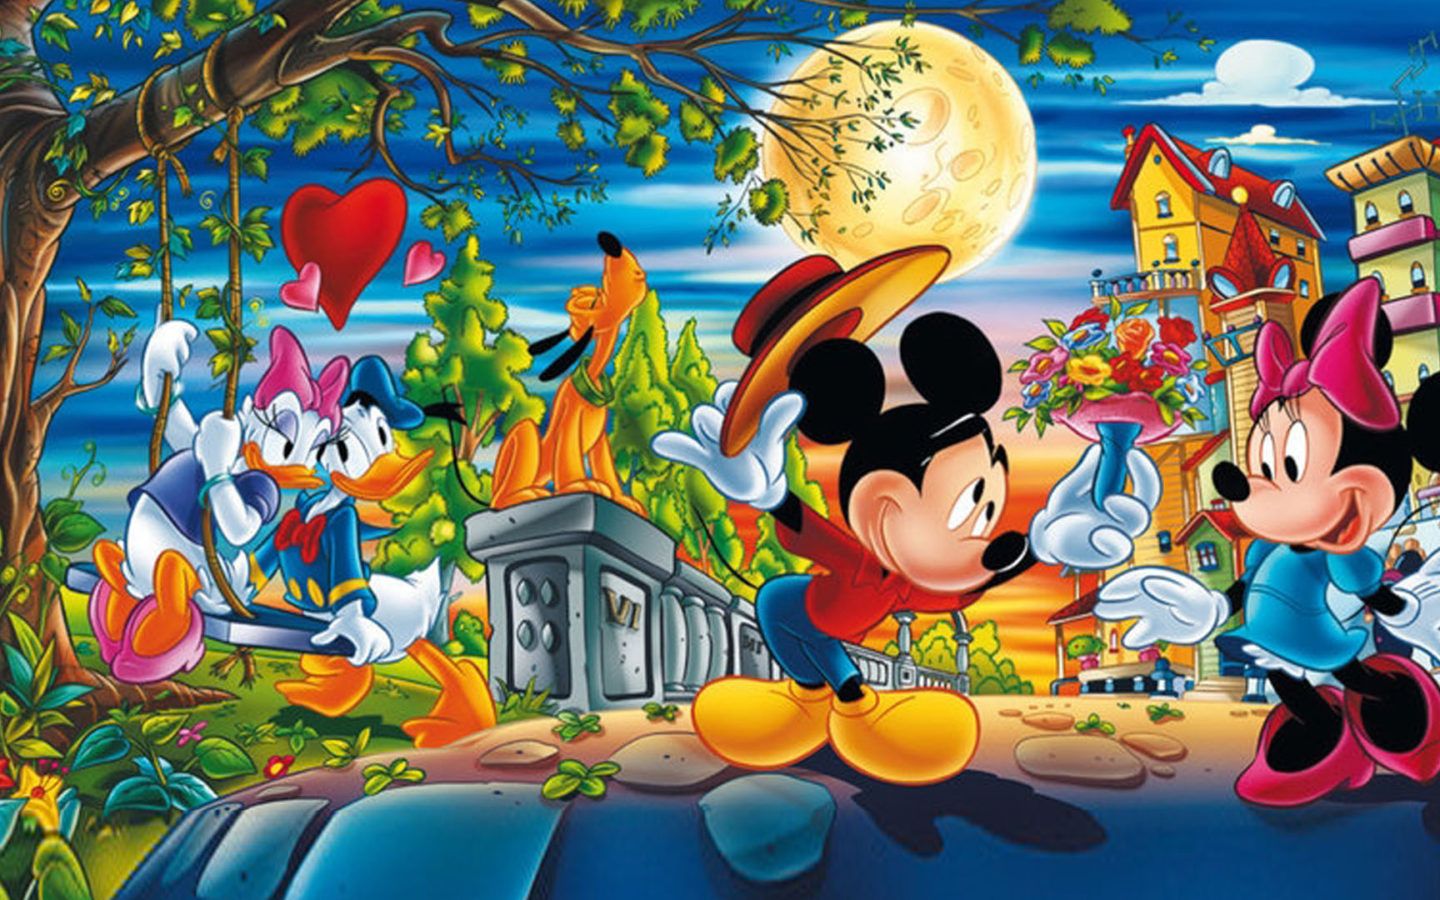 Valentine Day Cartoons Mickey With Minnie Mouse And Donald With Daisy Duck Disney Picture Love Couple Wallpaper HD 1920x1080, Wallpaper13.com